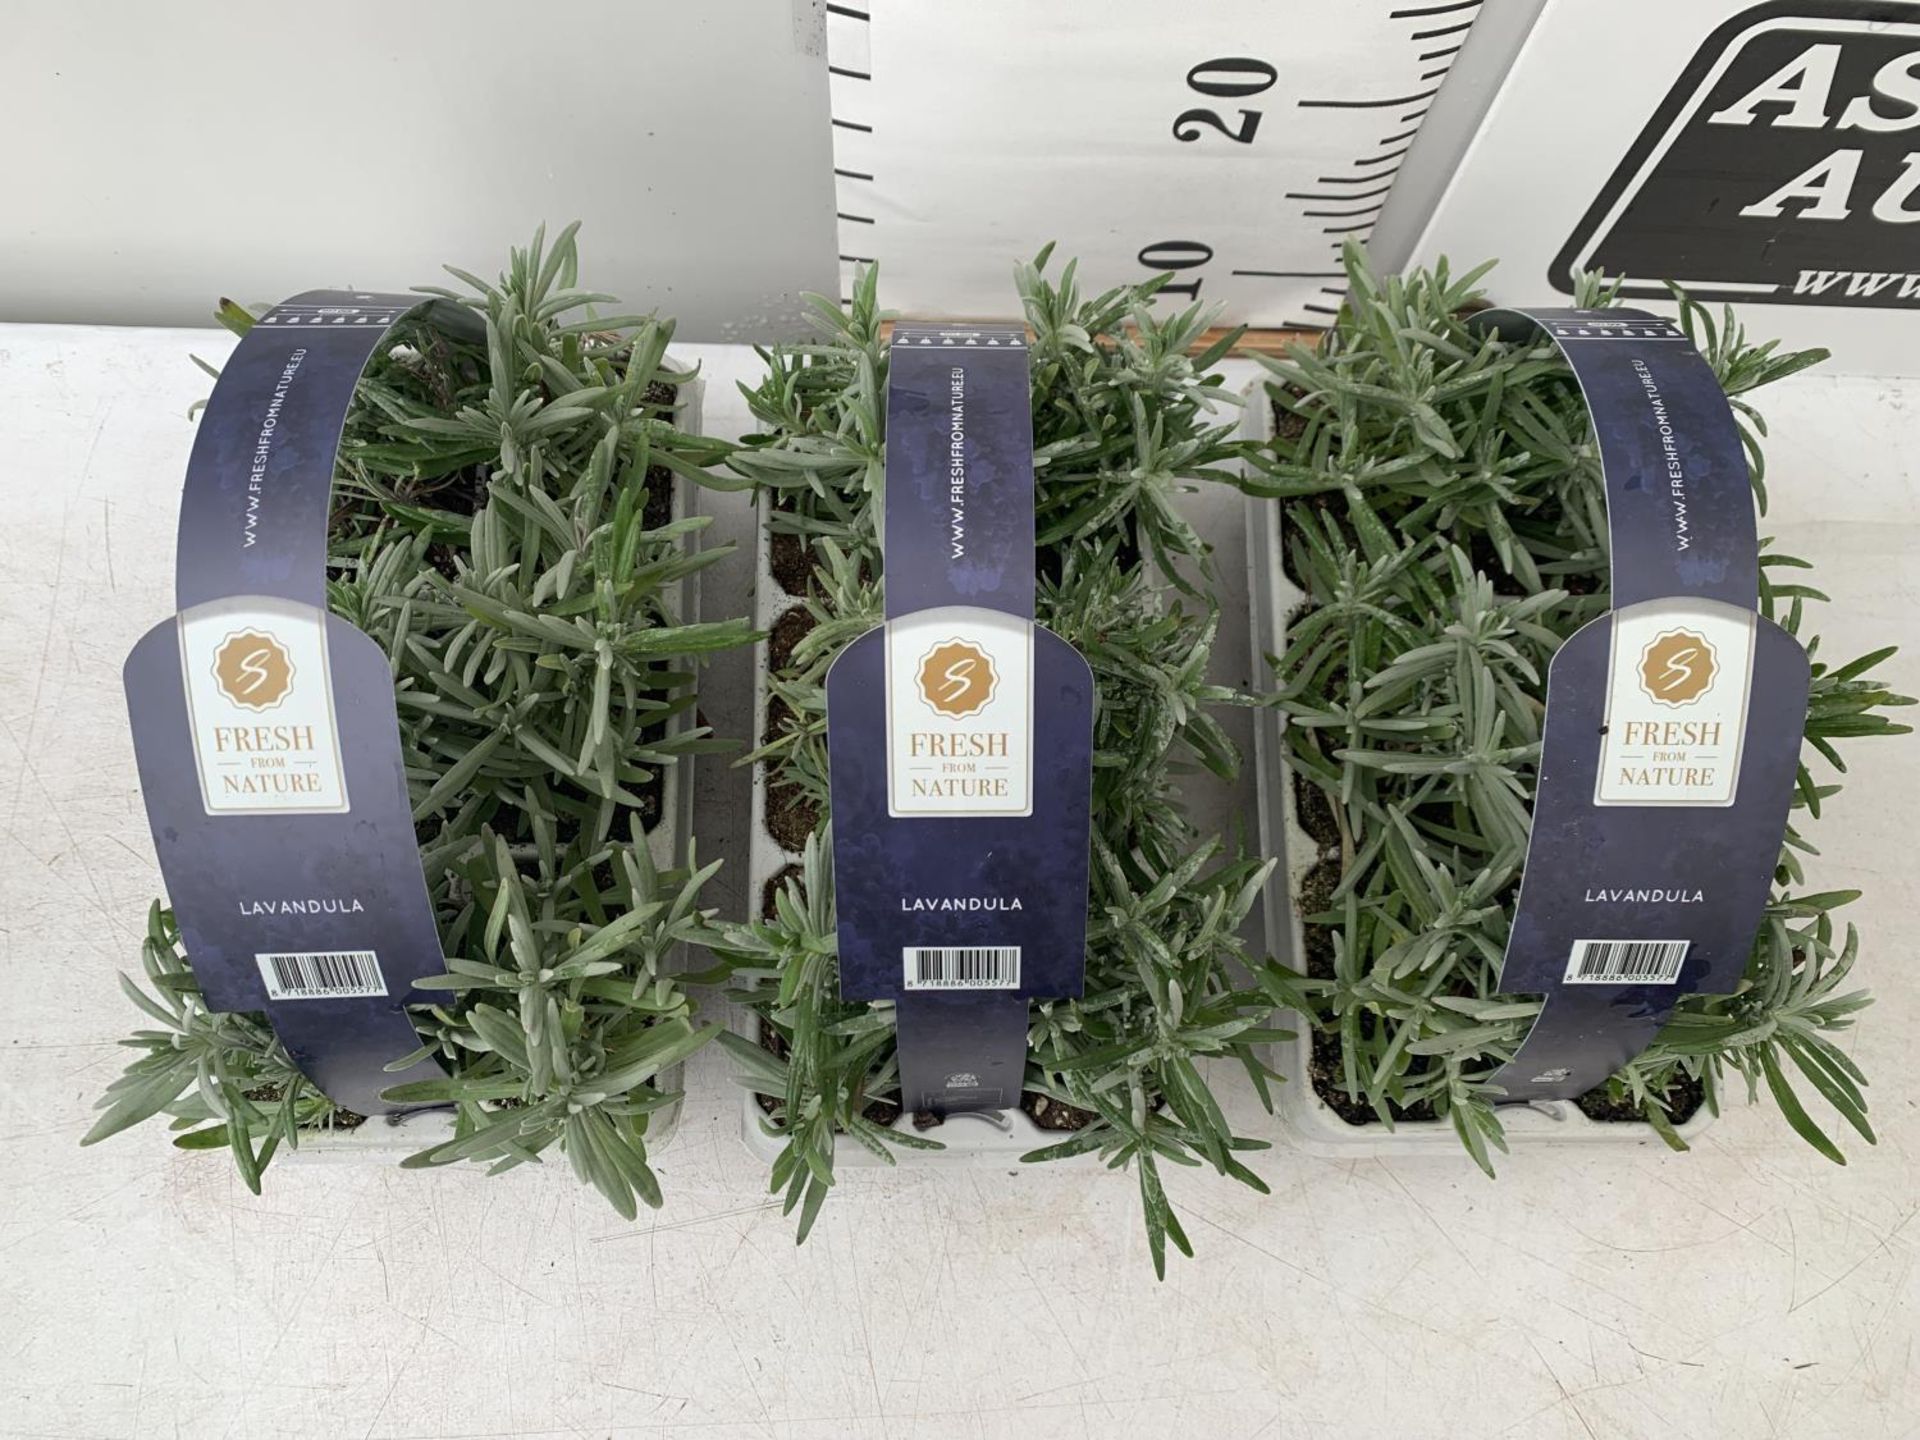 3 CARRY TRAYS OF PLUG LAVENDERS 18 PLANTS IN TOTAL PLUS VAT TO BE SOLD FOR THE THREE TRAYS - Image 4 of 6